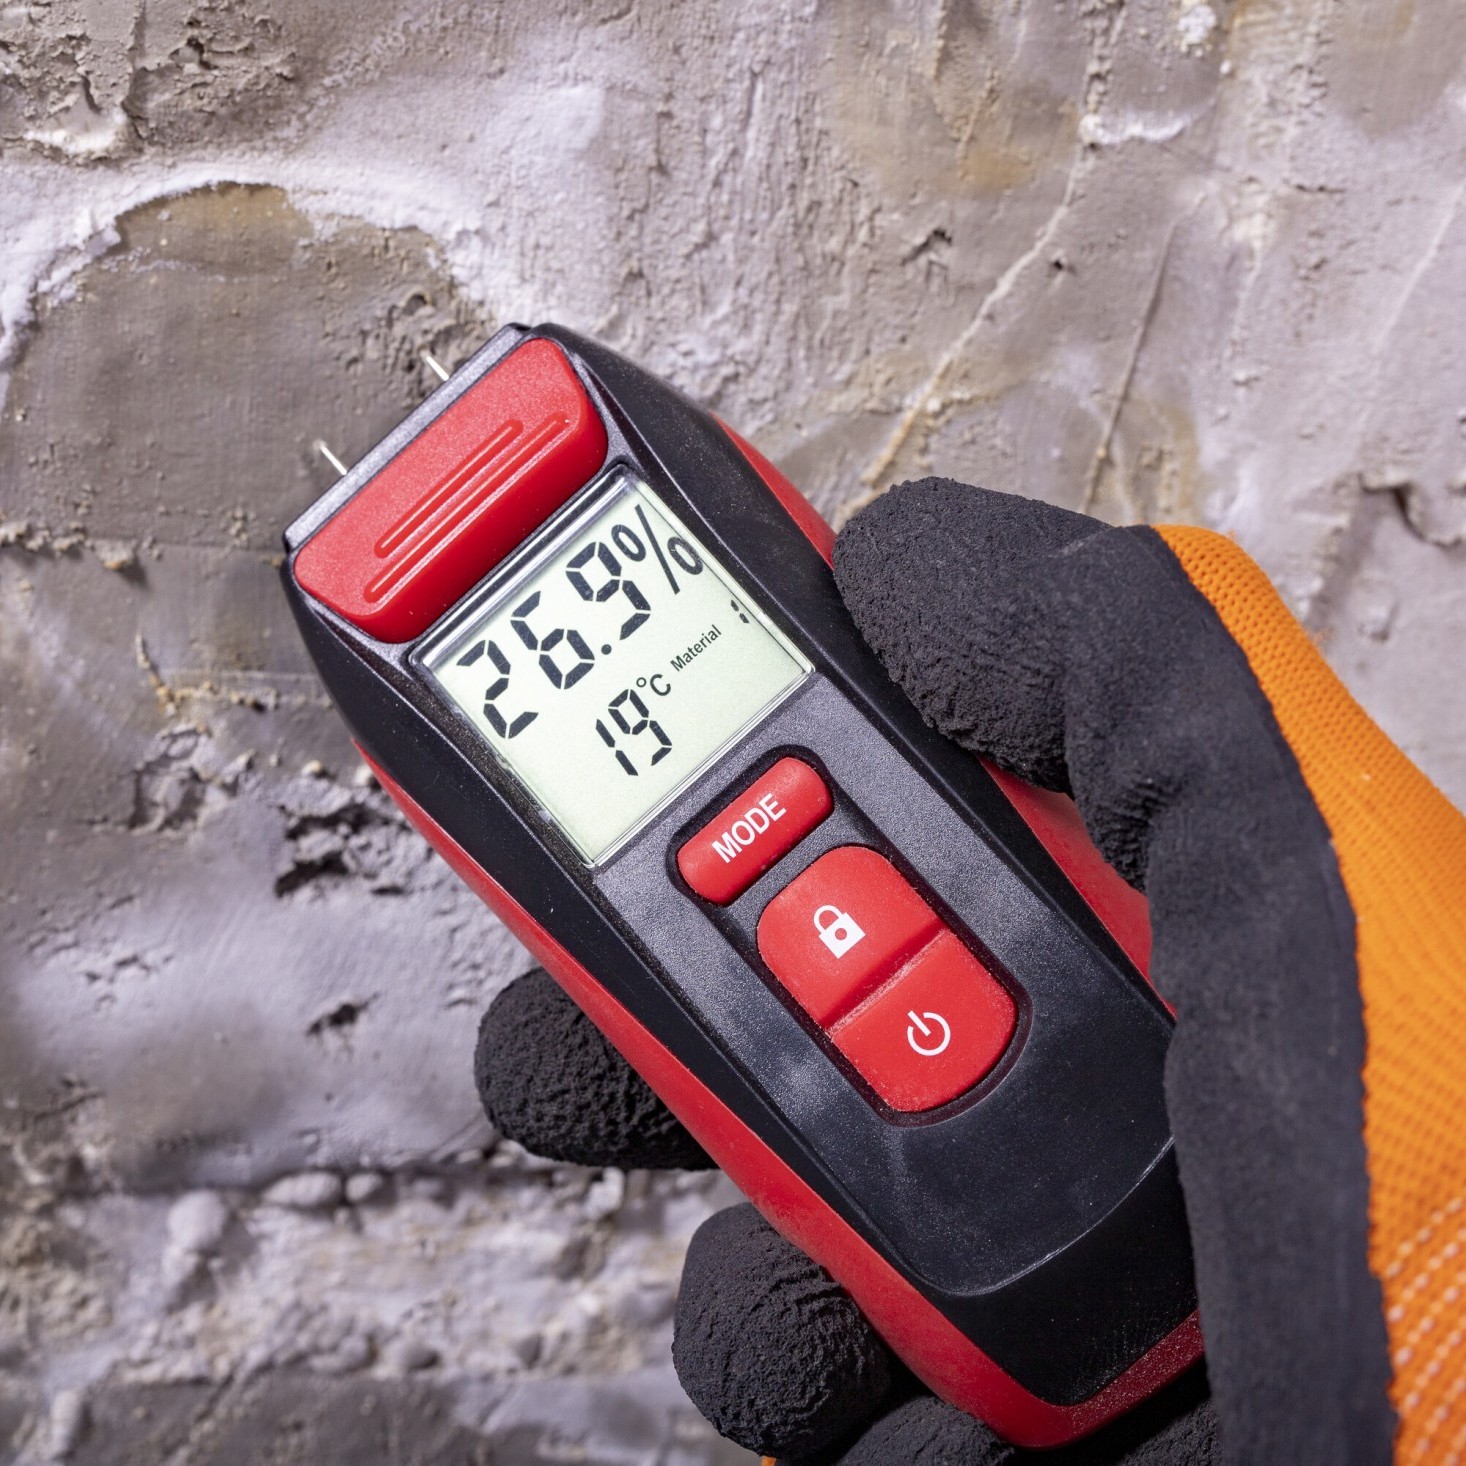 Frequently Asked Questions about Basement Waterproofing in Hamilton